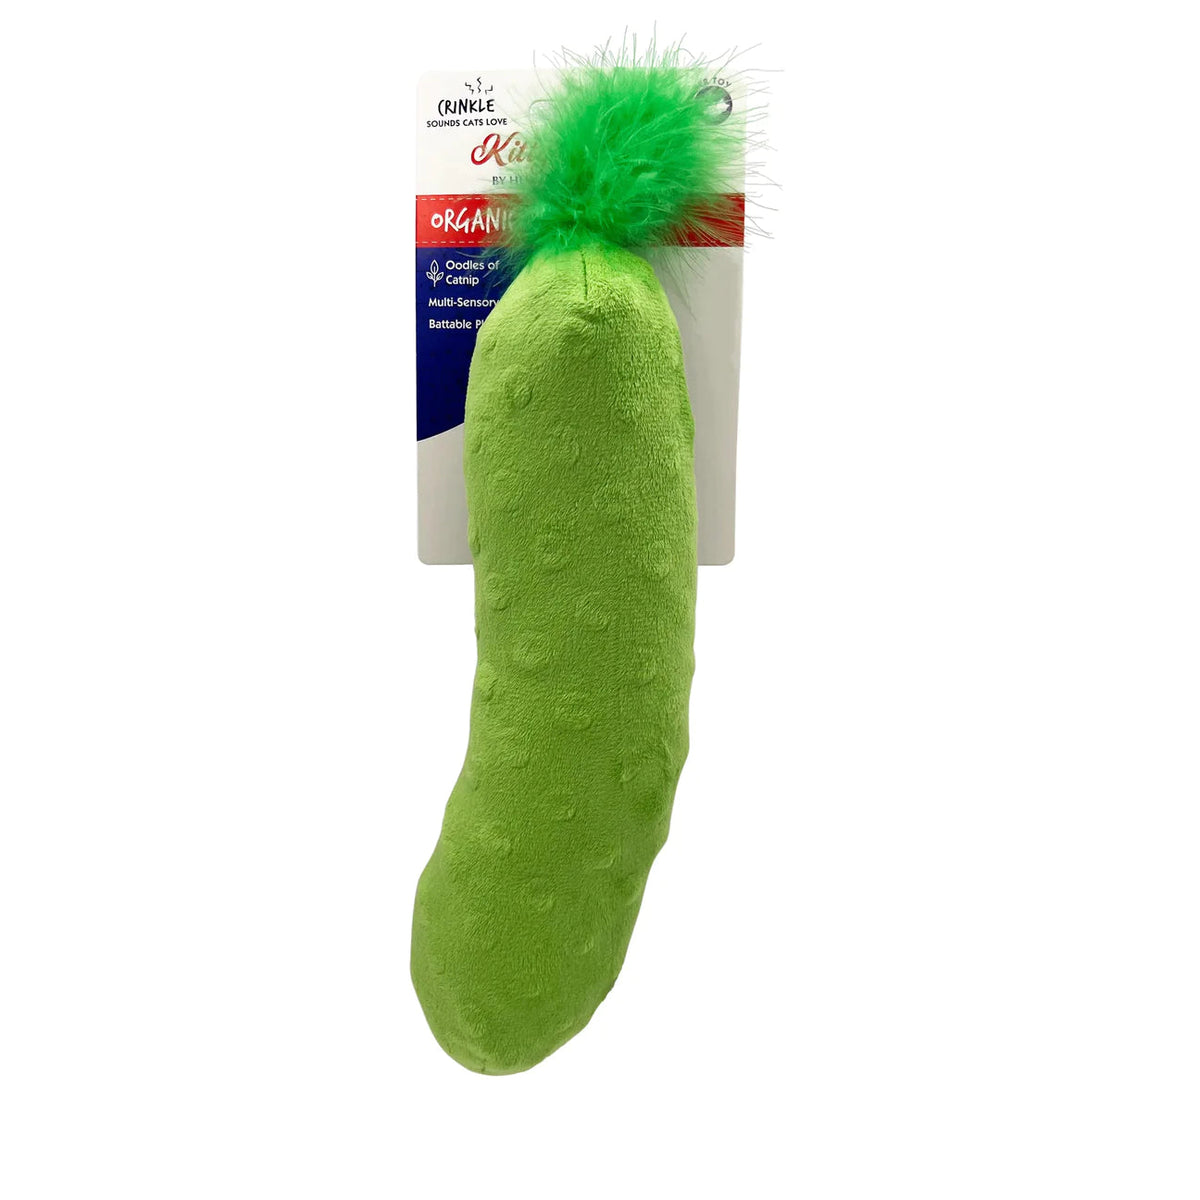 Kittybelles Pickle Kicker Cat Toy-Four Muddy Paws